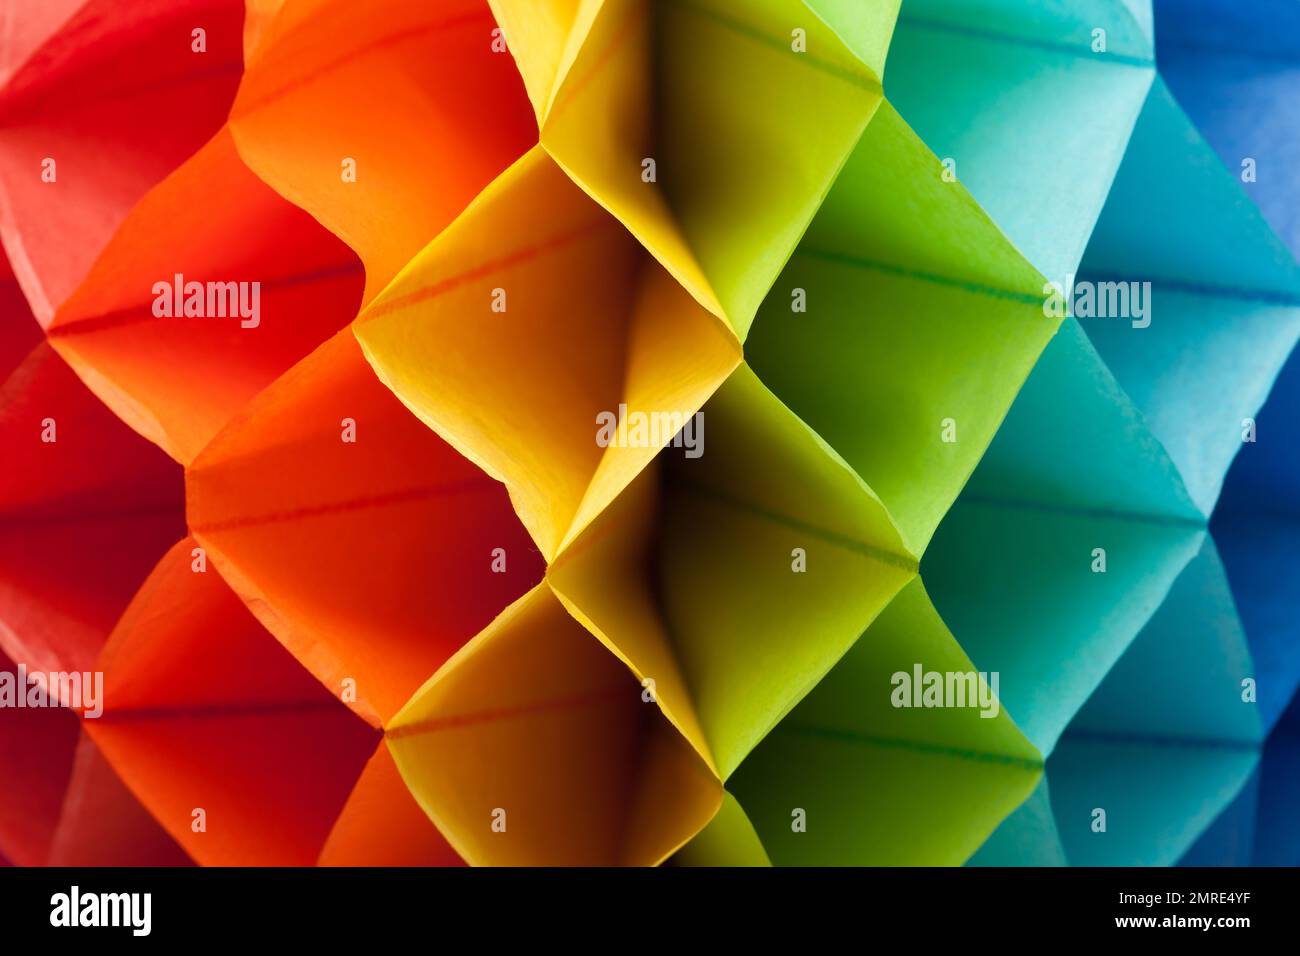 Rainbow Paper Background Stock Photo, Picture and Royalty Free Image. Image  30795657.